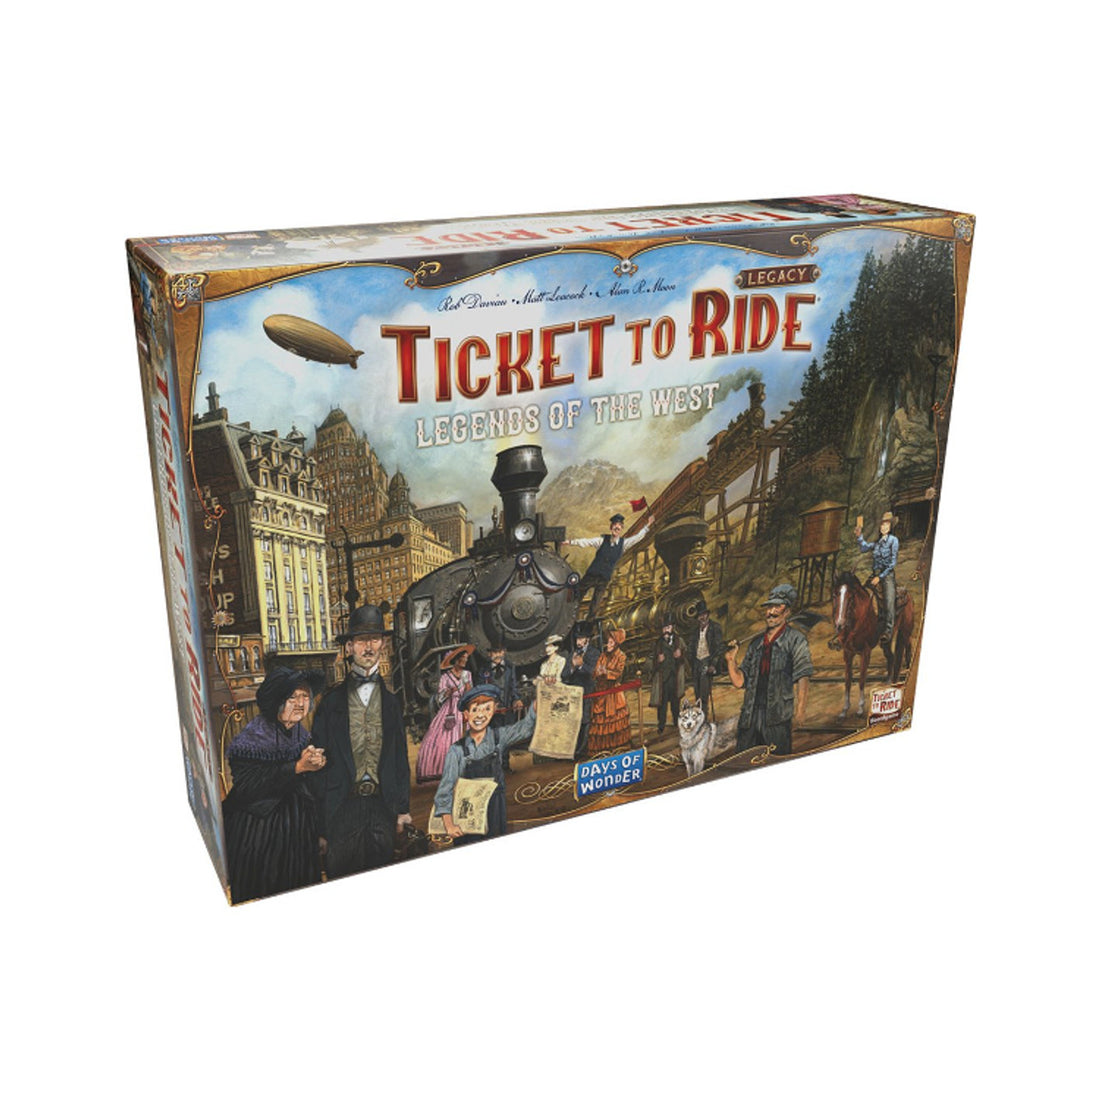 Upcoming Release: A New Ticket to Ride Game!